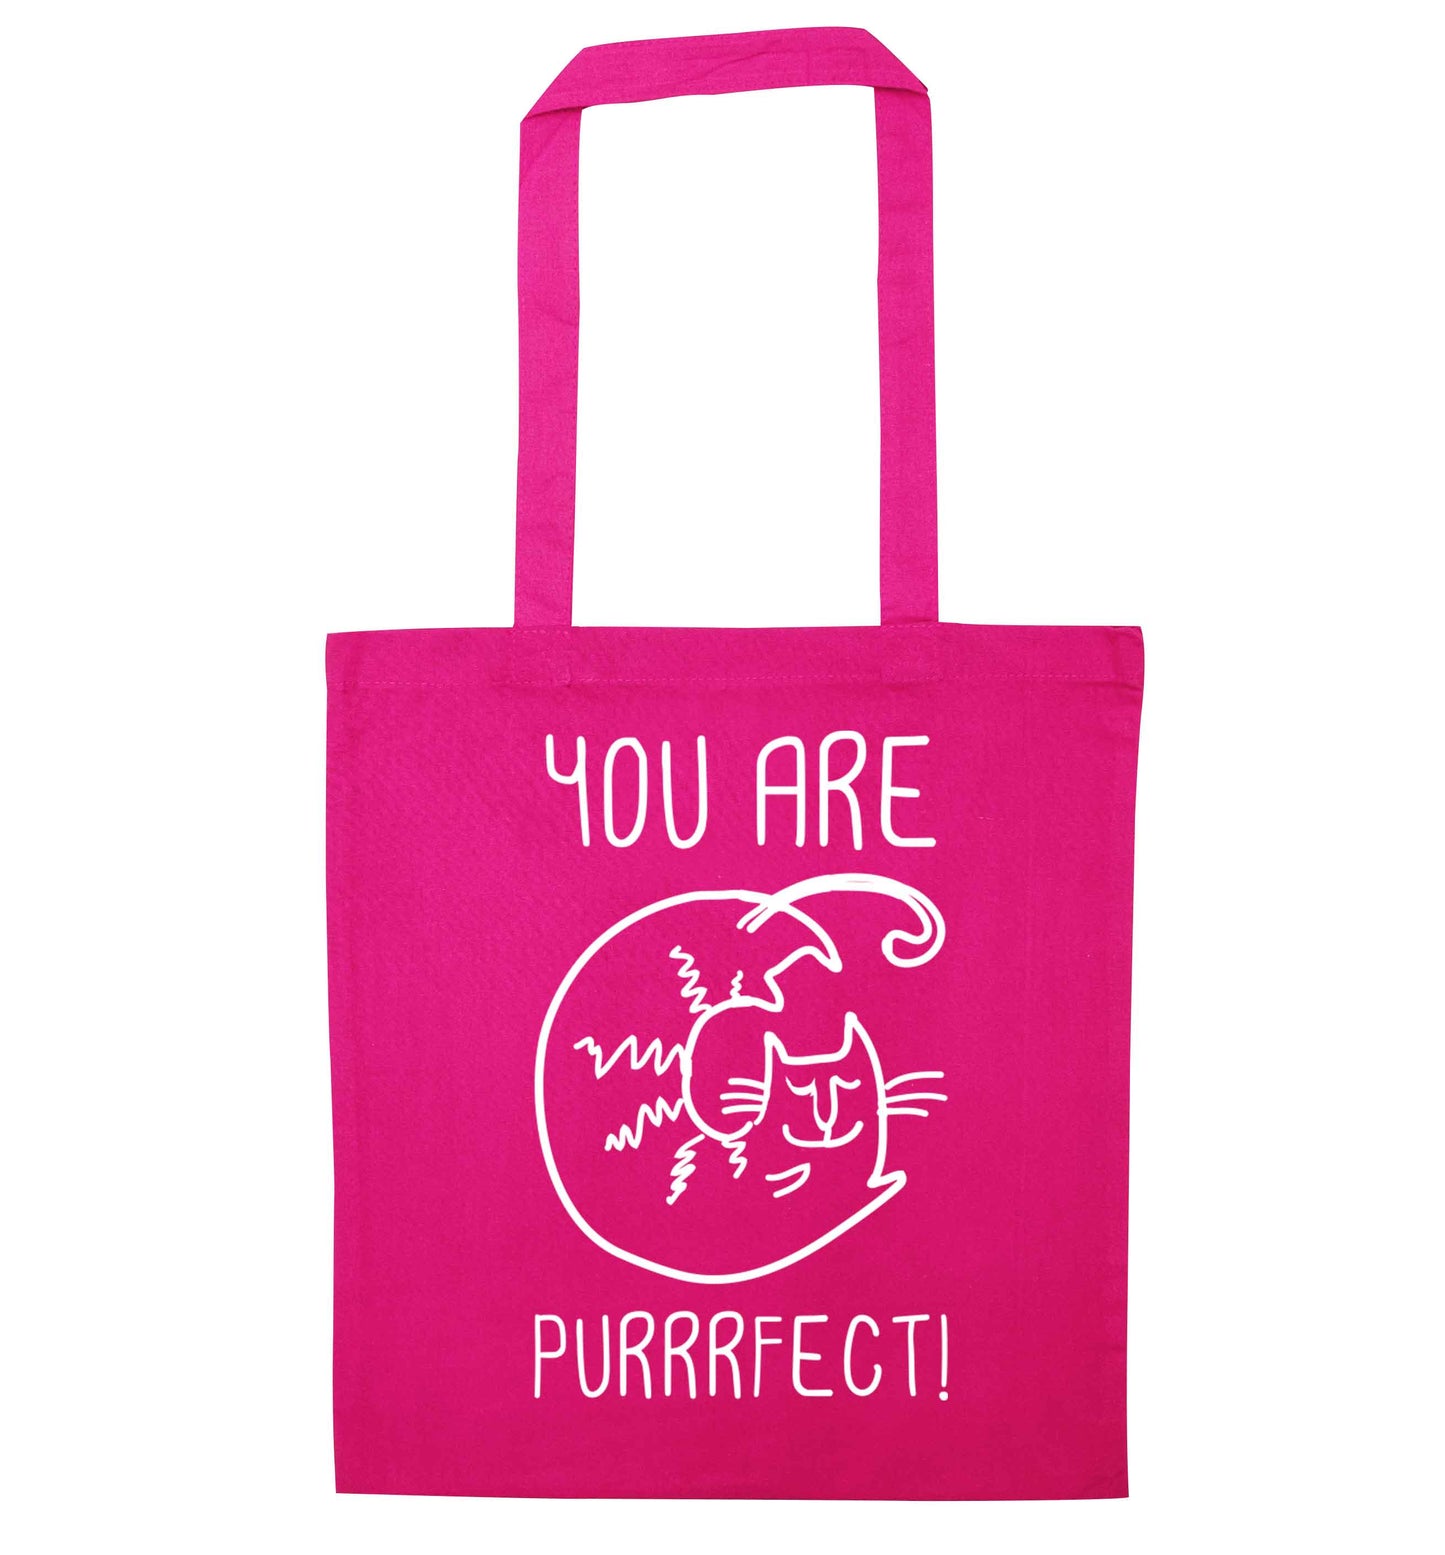 You are purrfect pink tote bag